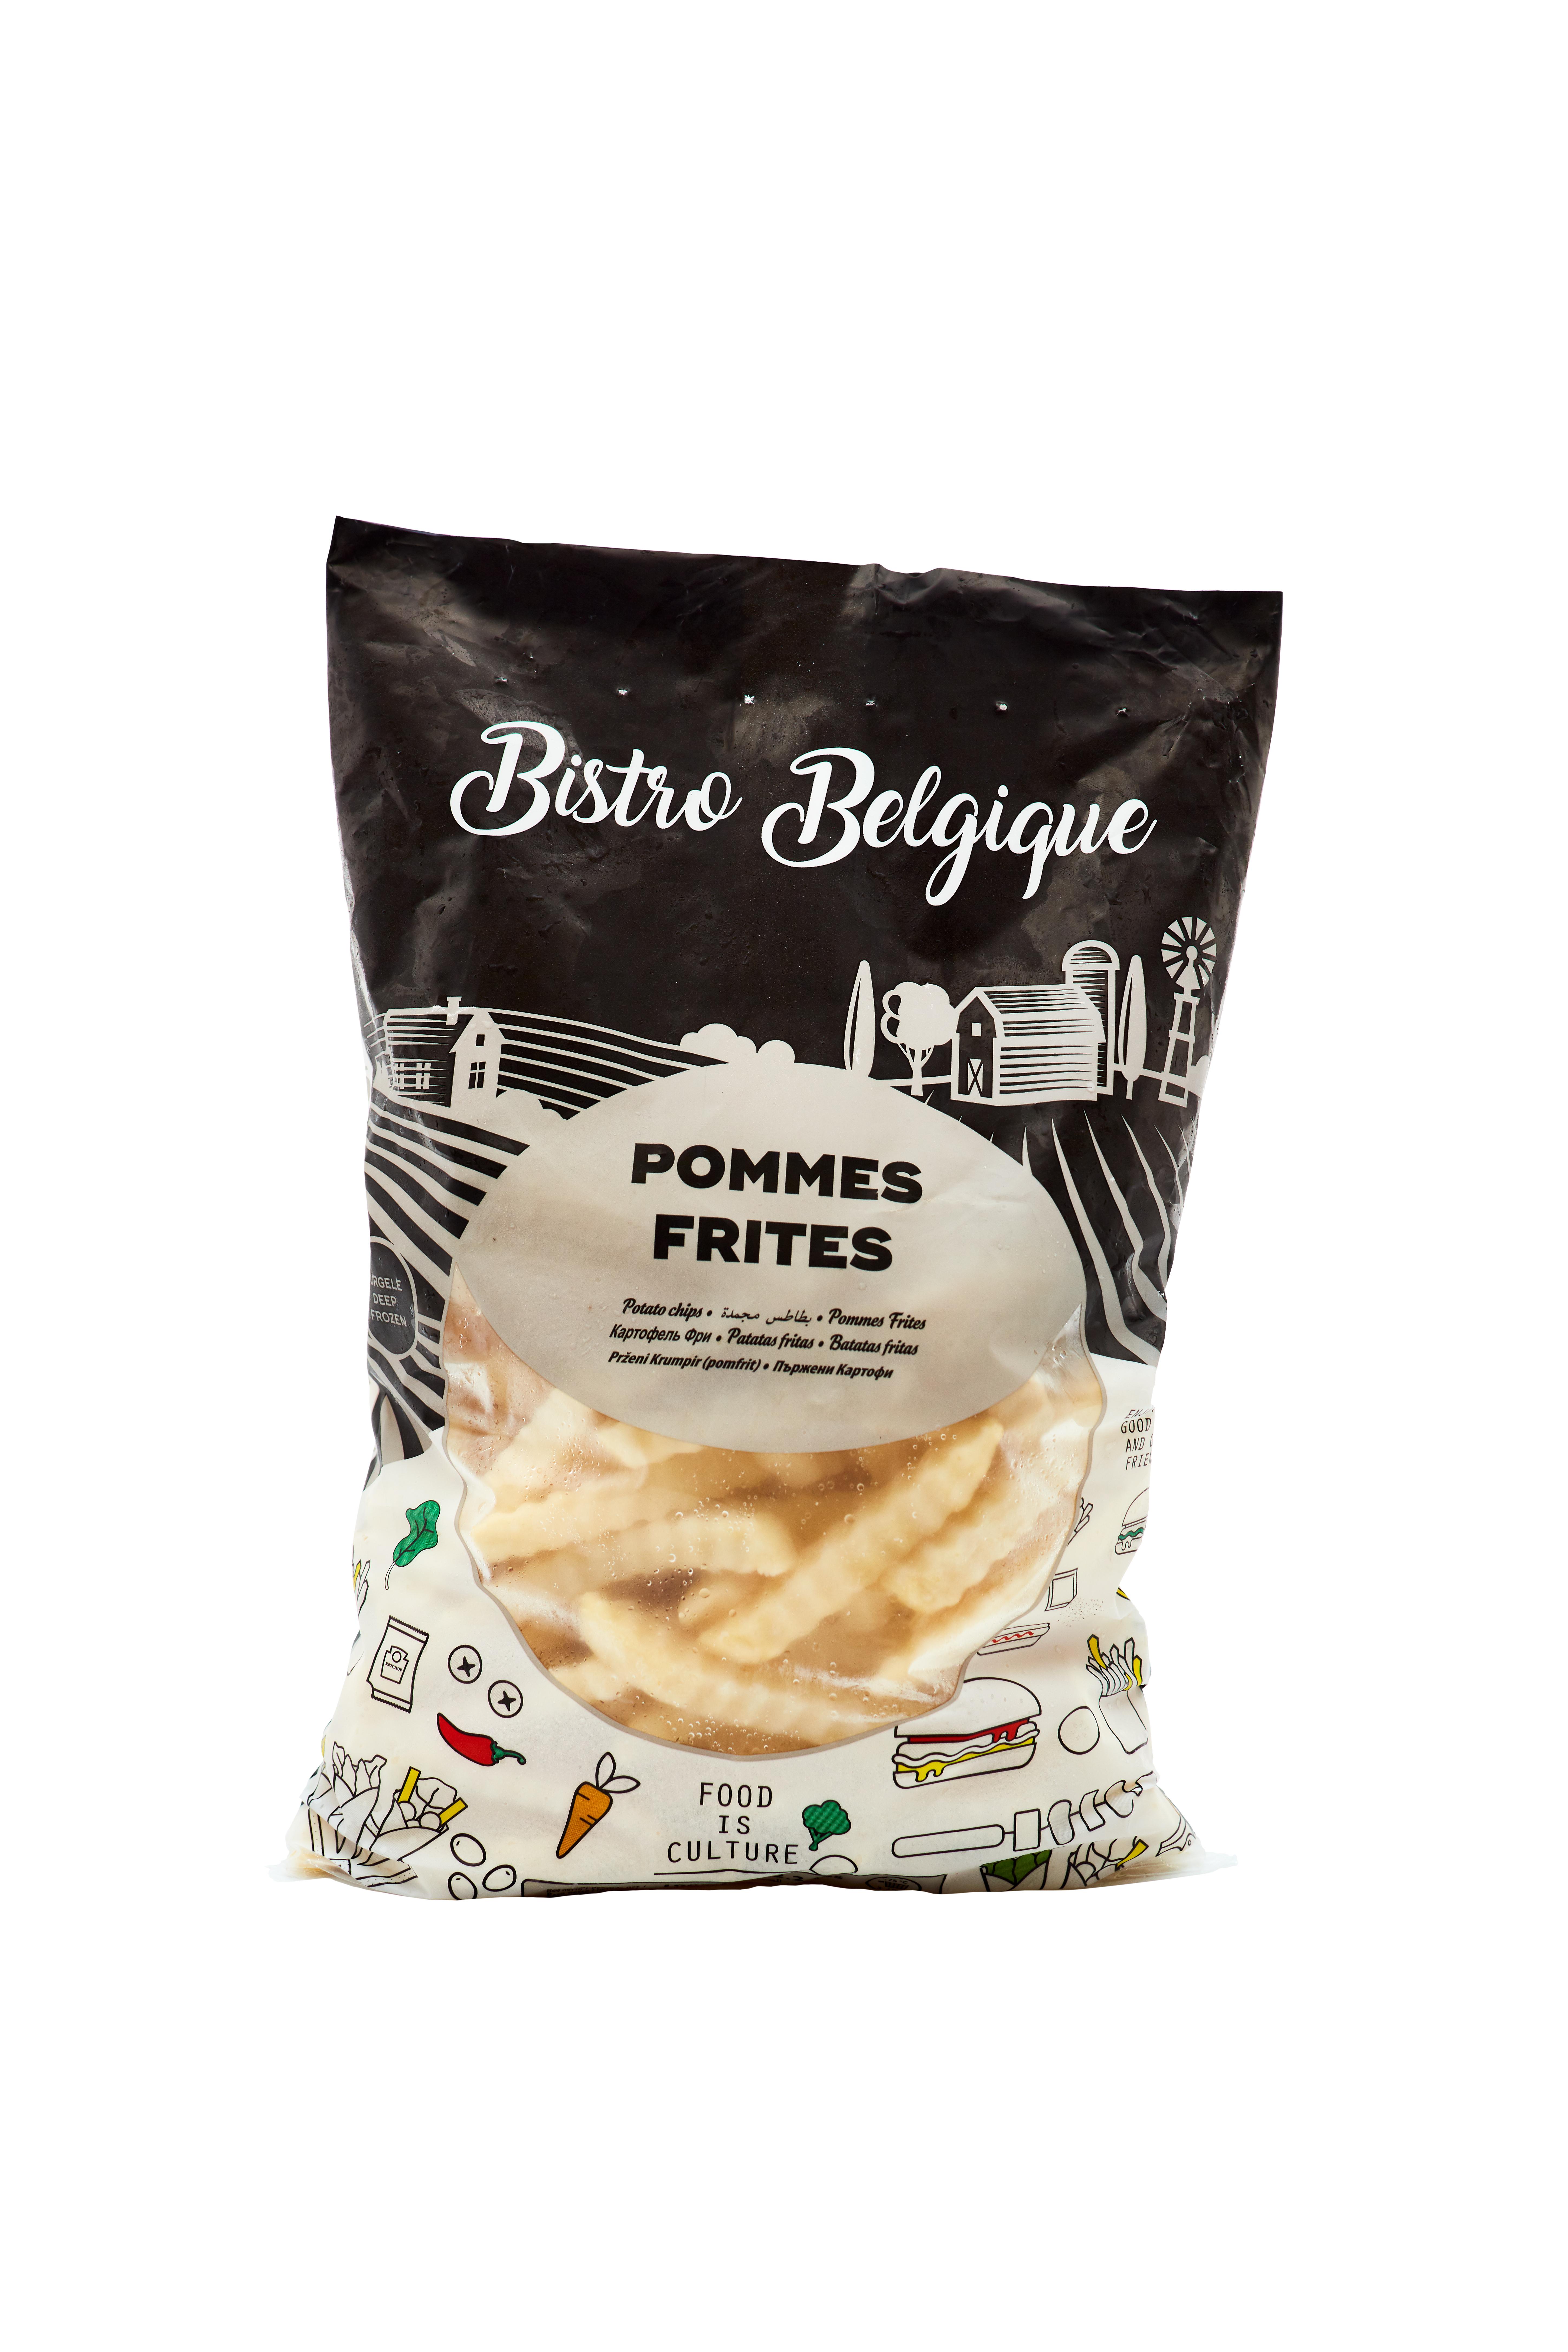 French fries crinkle cut packaging Bistro Belgique brand